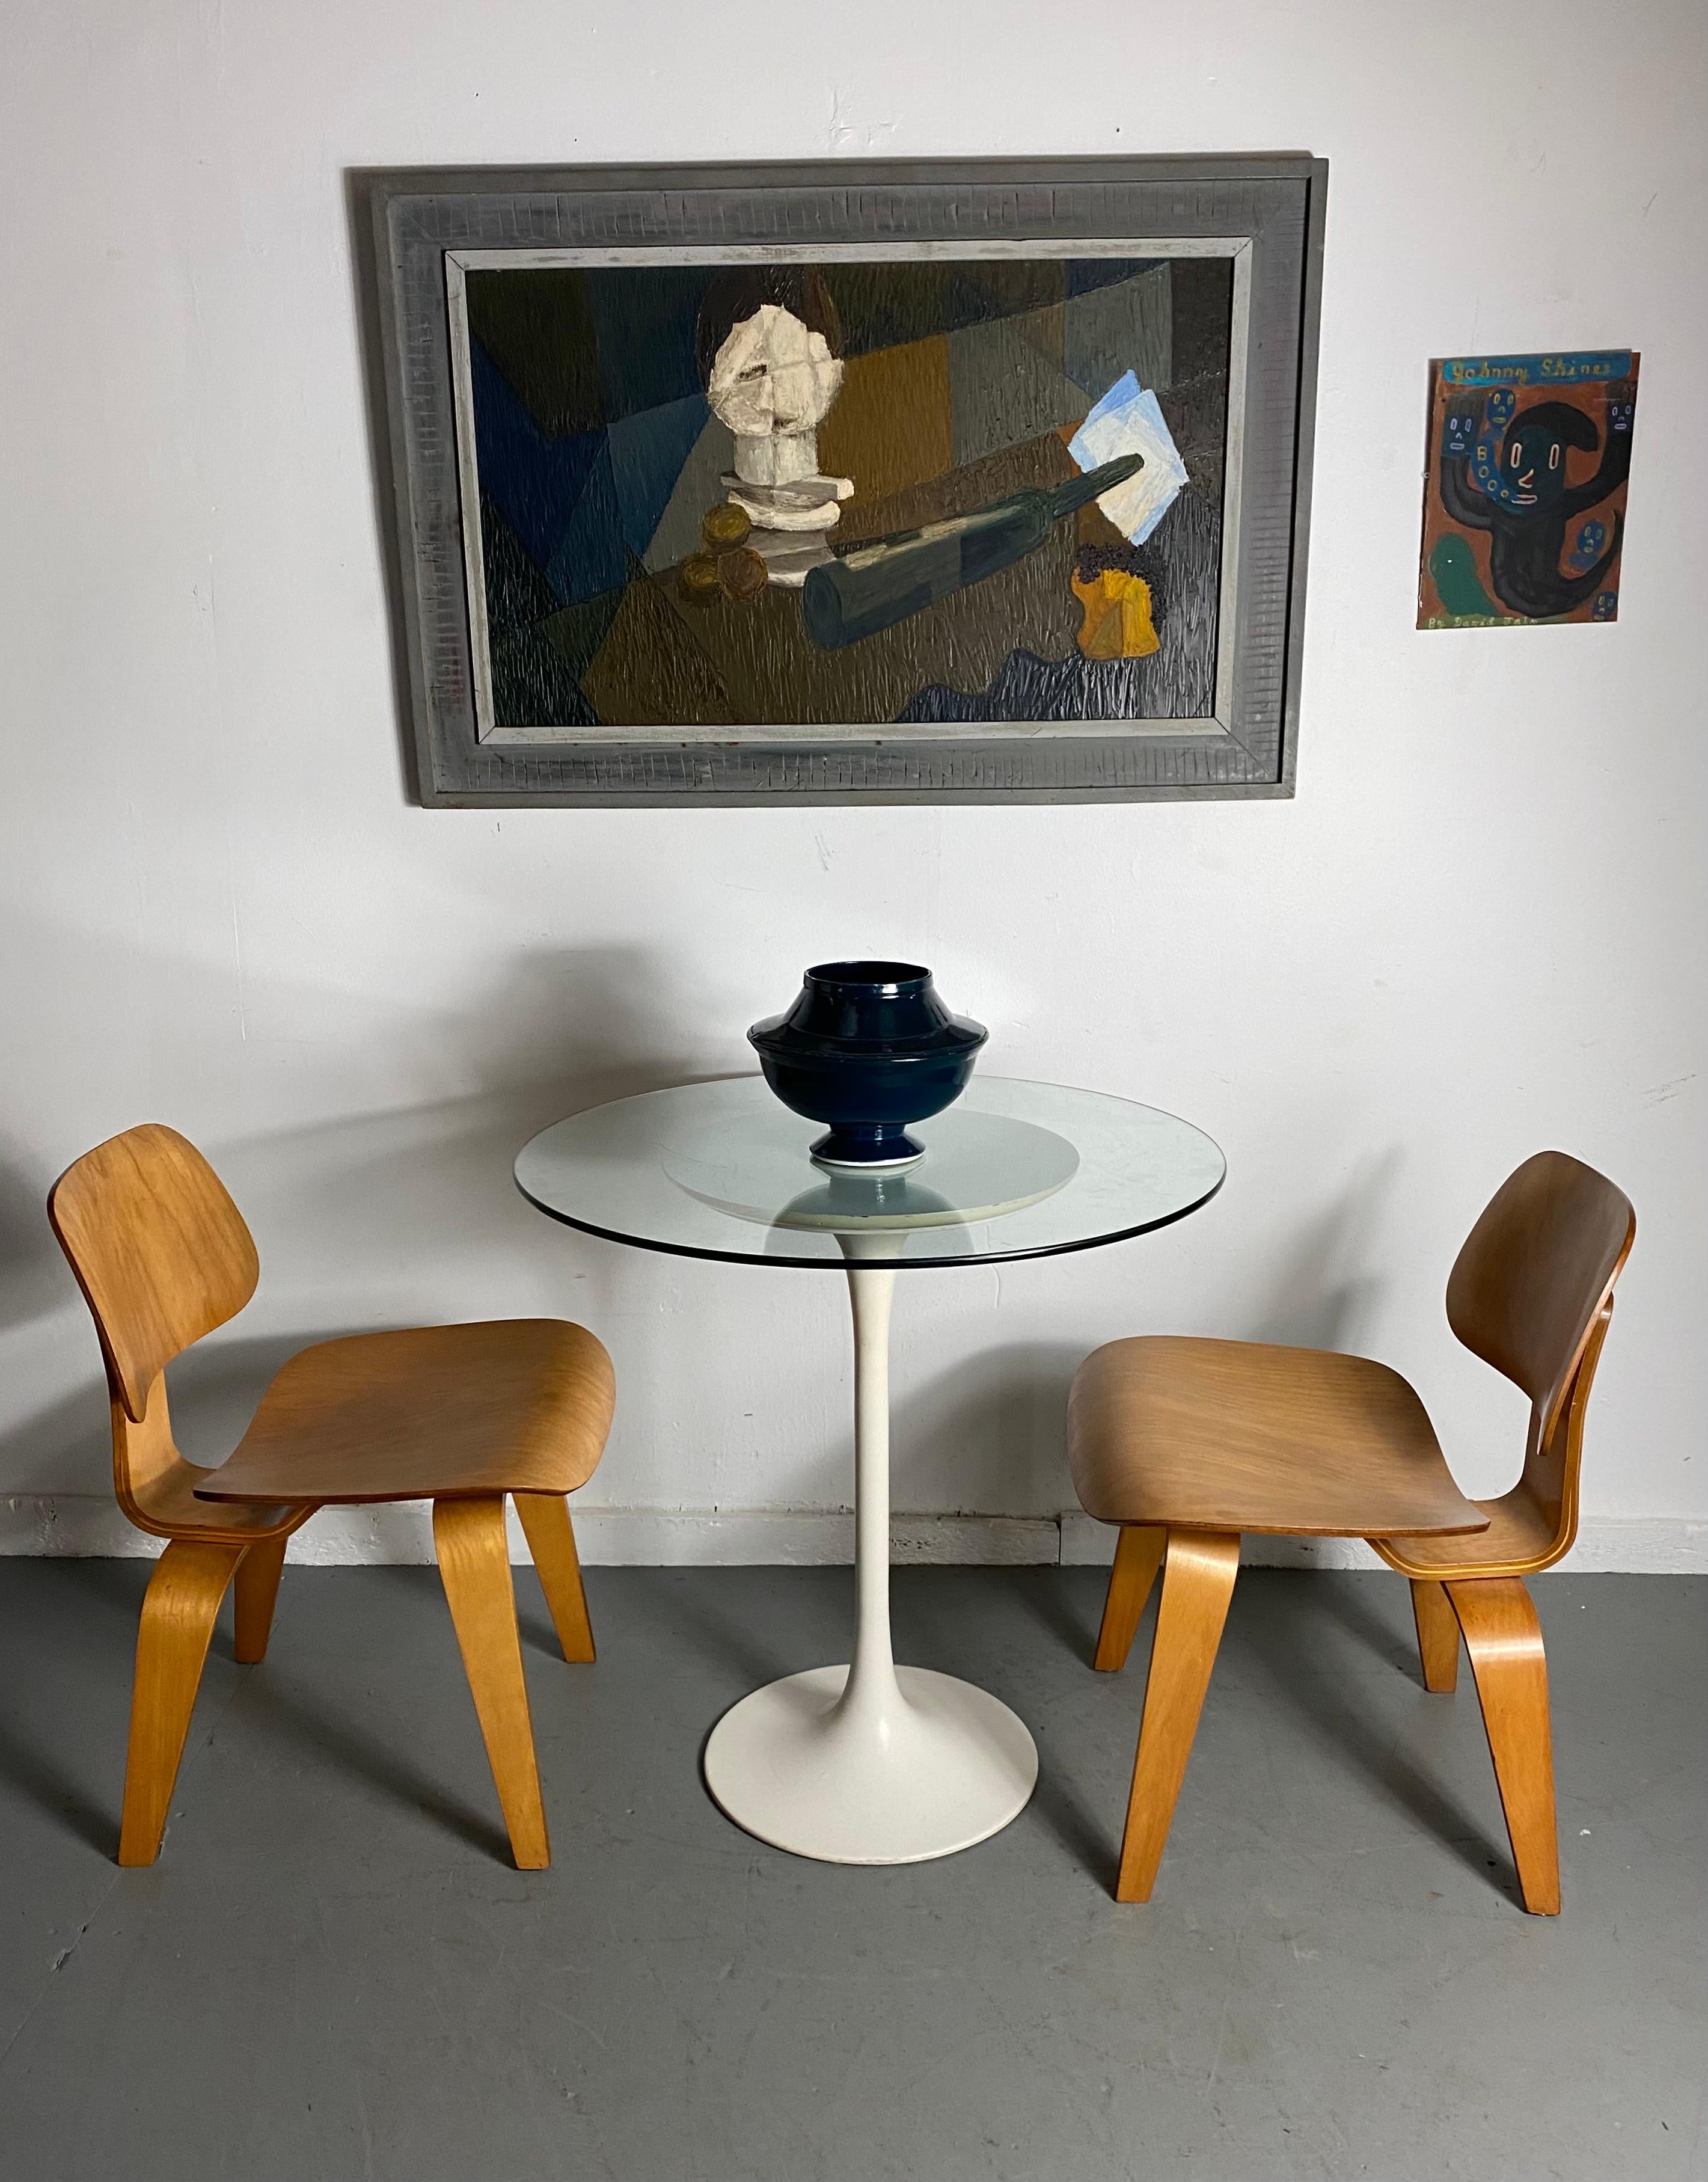 charles eames chairs